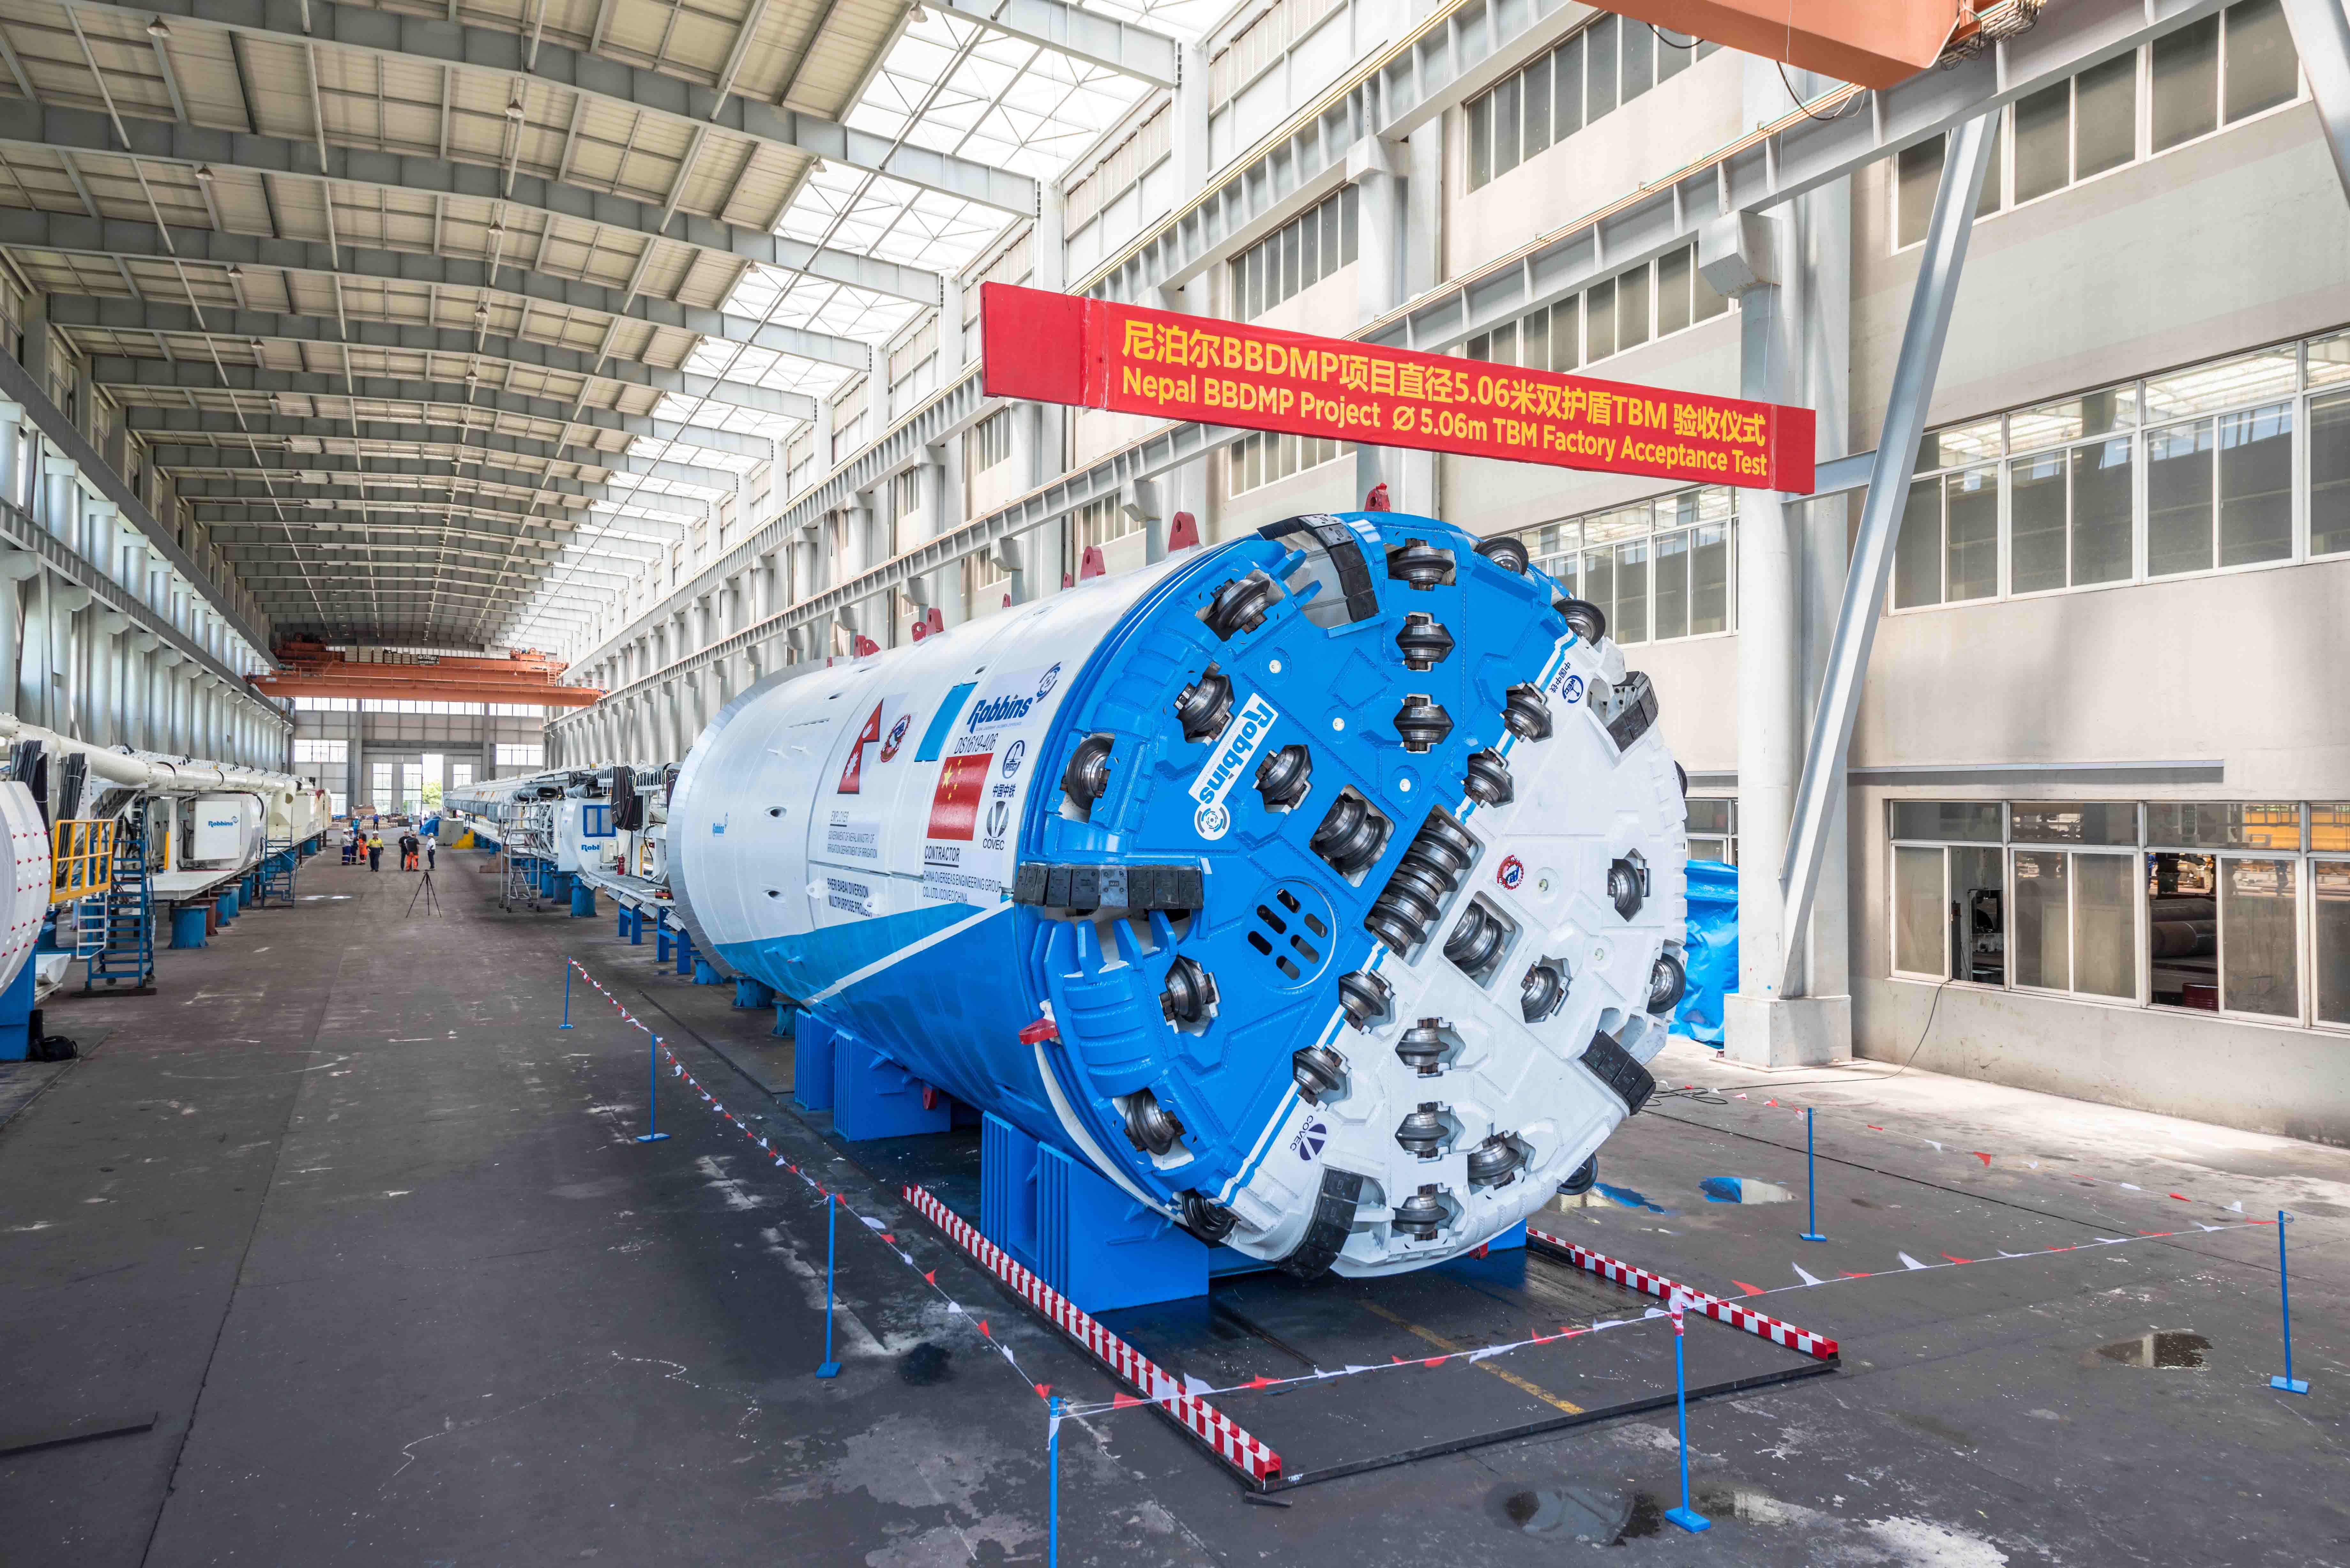 The Robbins Double Shield TBM for Nepal's Bheri Babai project.